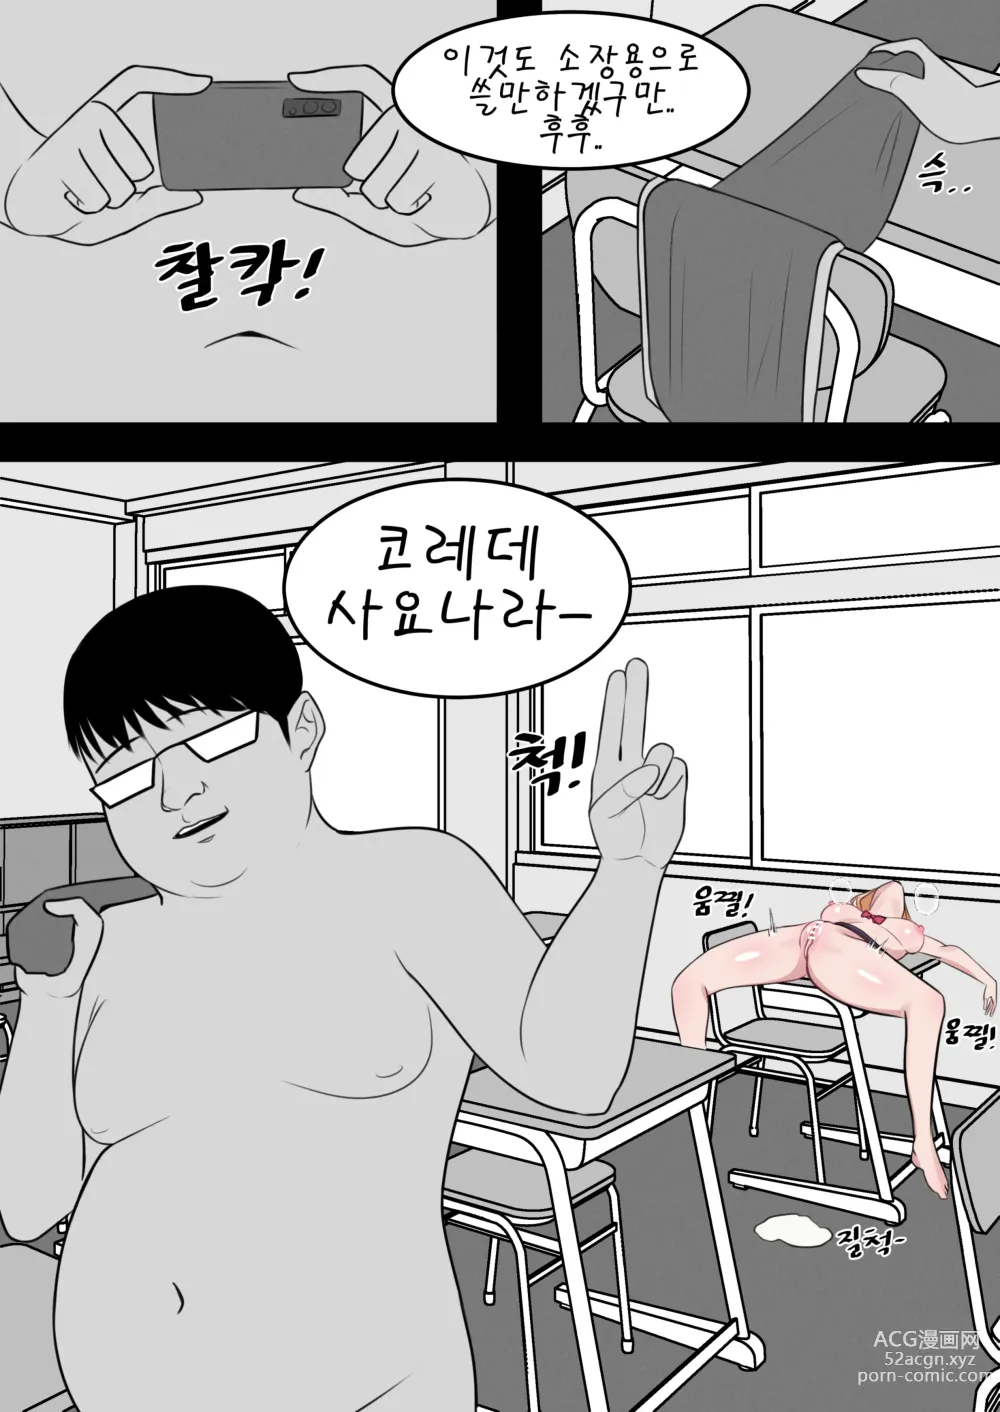 Page 14 of doujinshi After school with Il Jin-nyeo